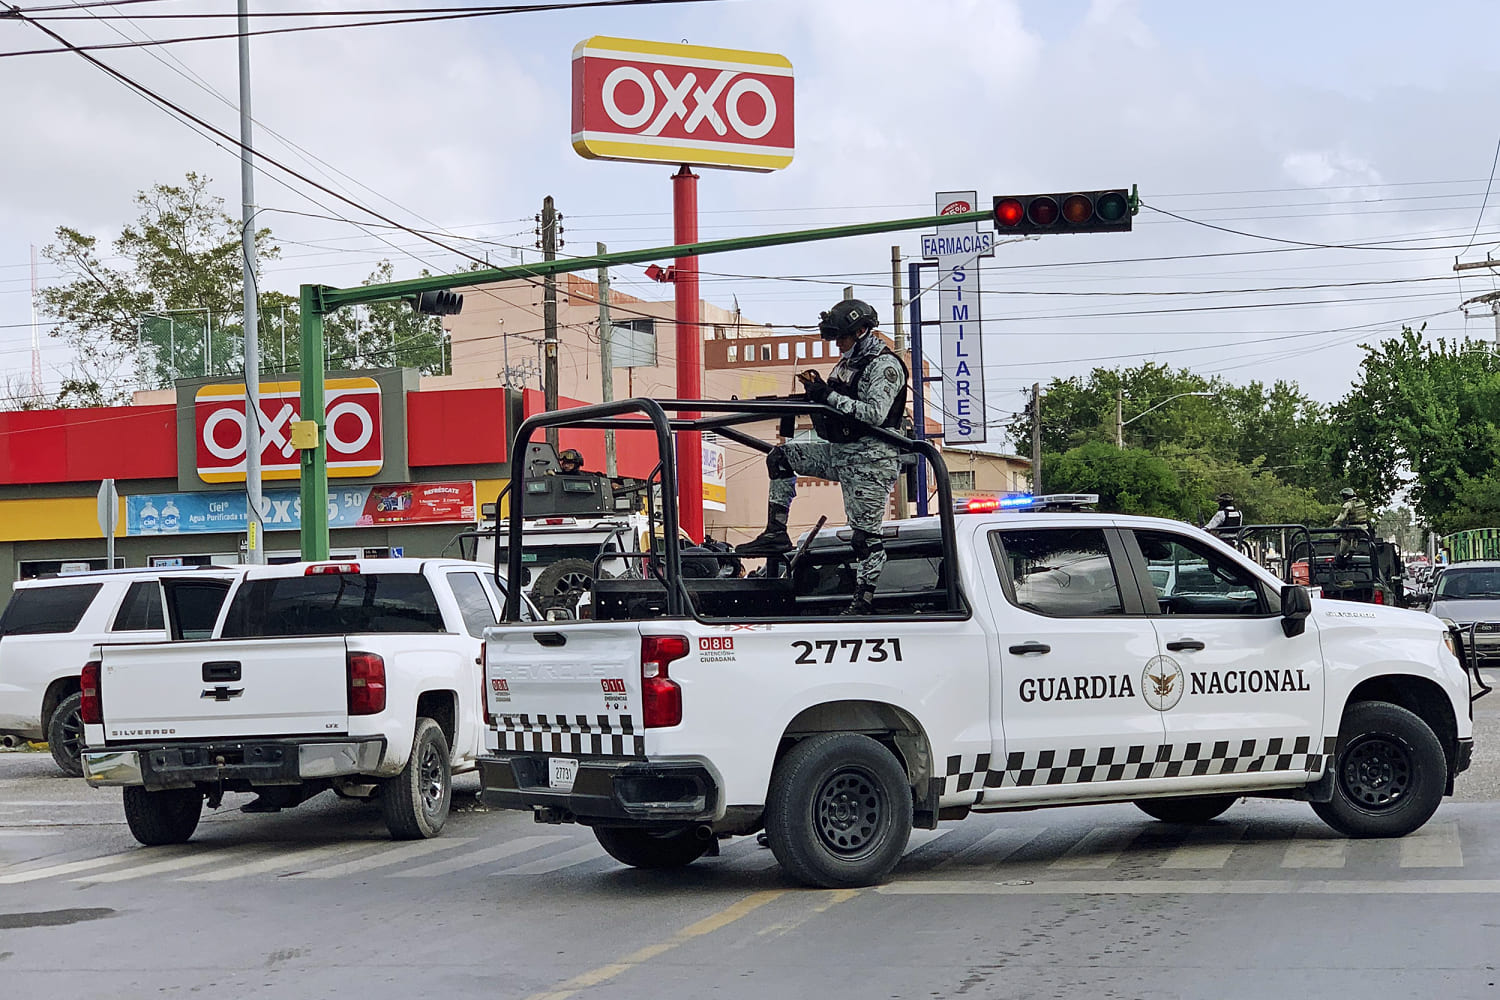 Extortion, gang violence hits even big corporations and business leaders in Mexico